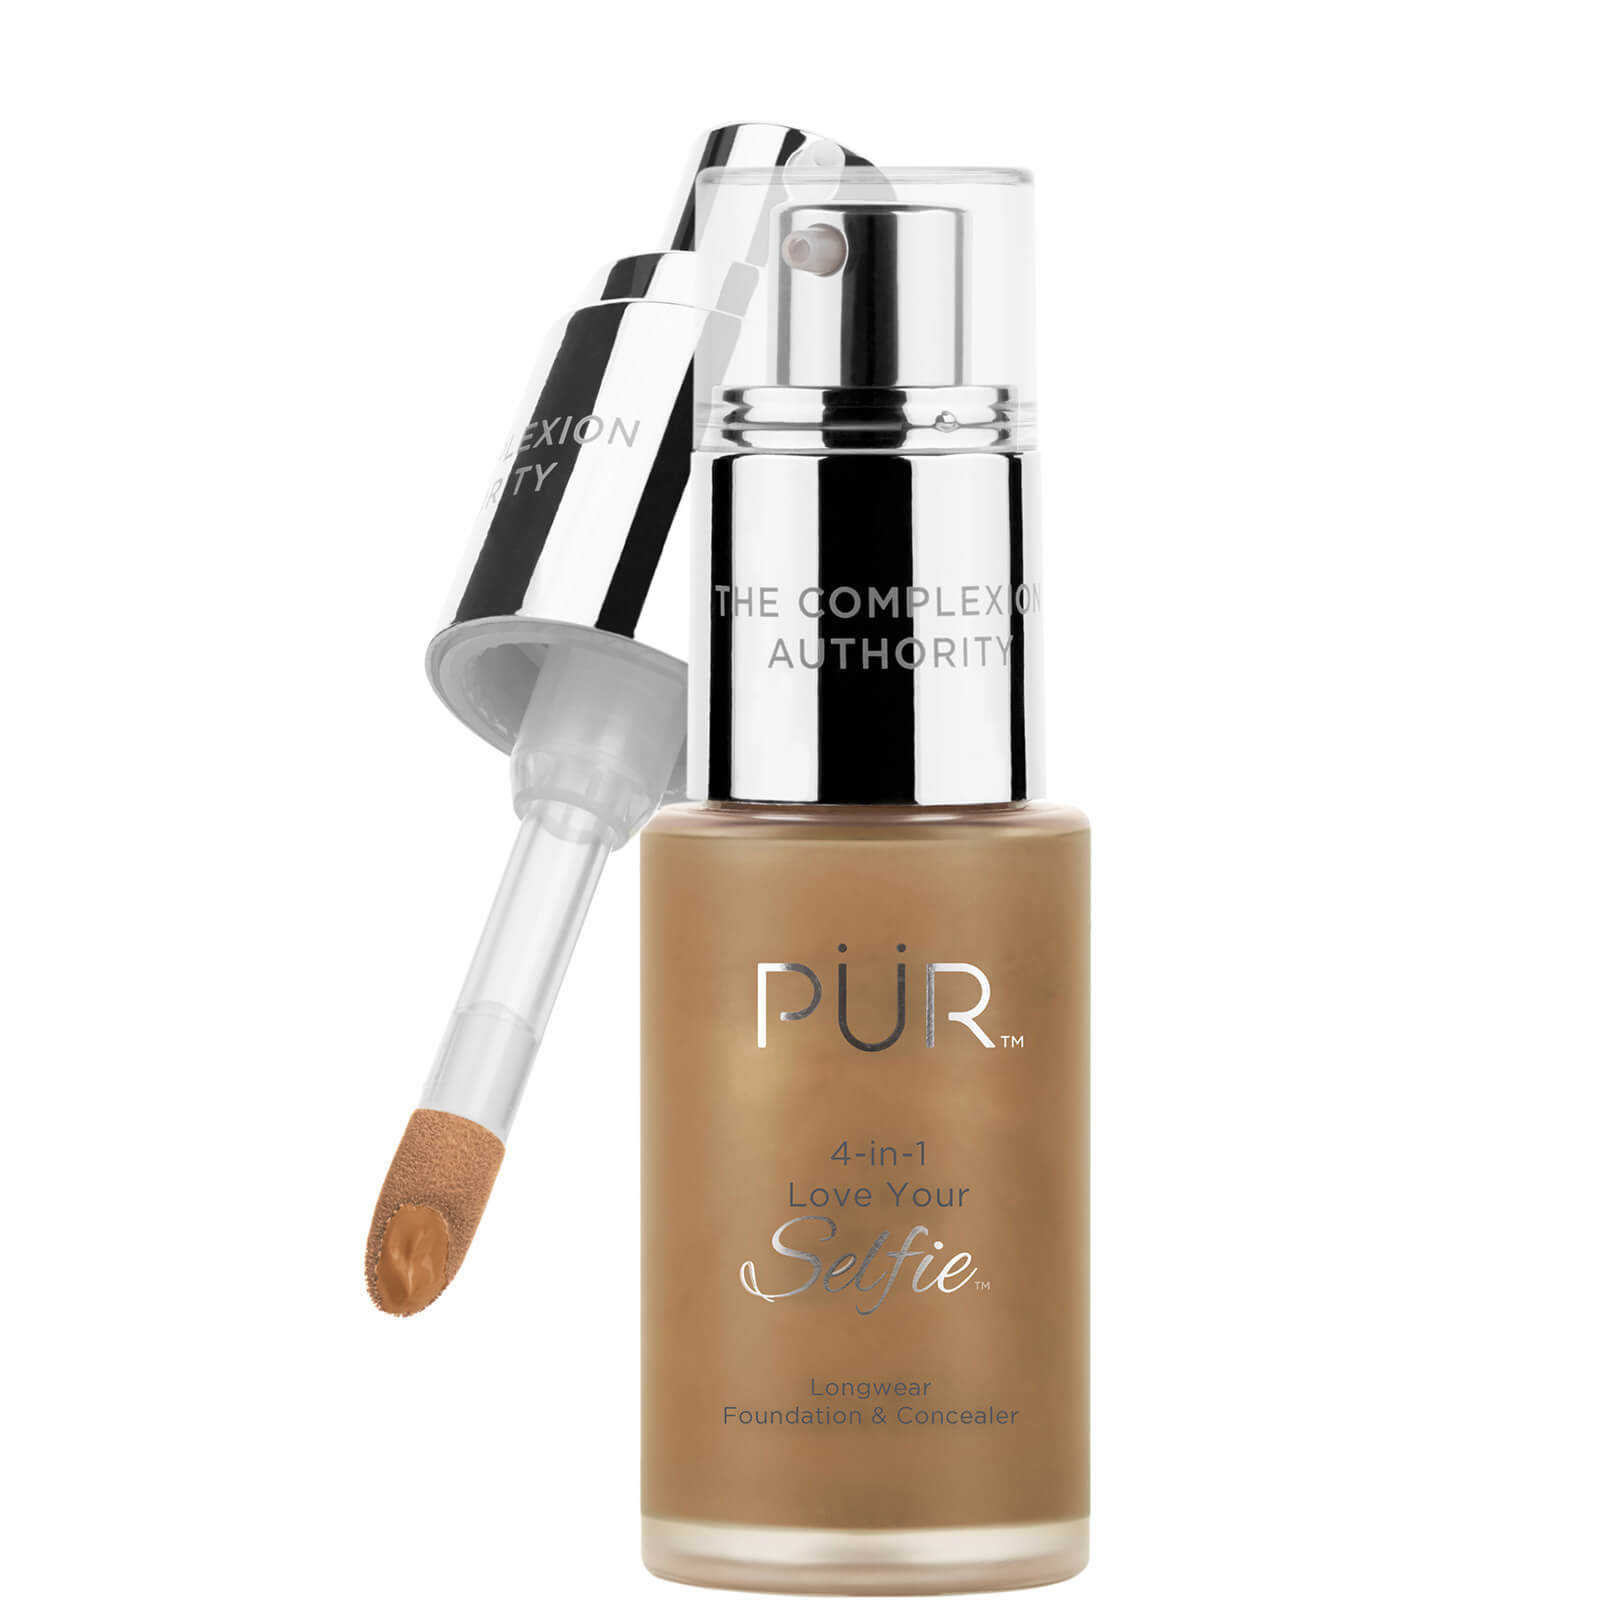 PÜR 4-in-1 Love Your Selfie Longwear Foundation and Concealer 30ml (Various Shades) - DG3/Caramel